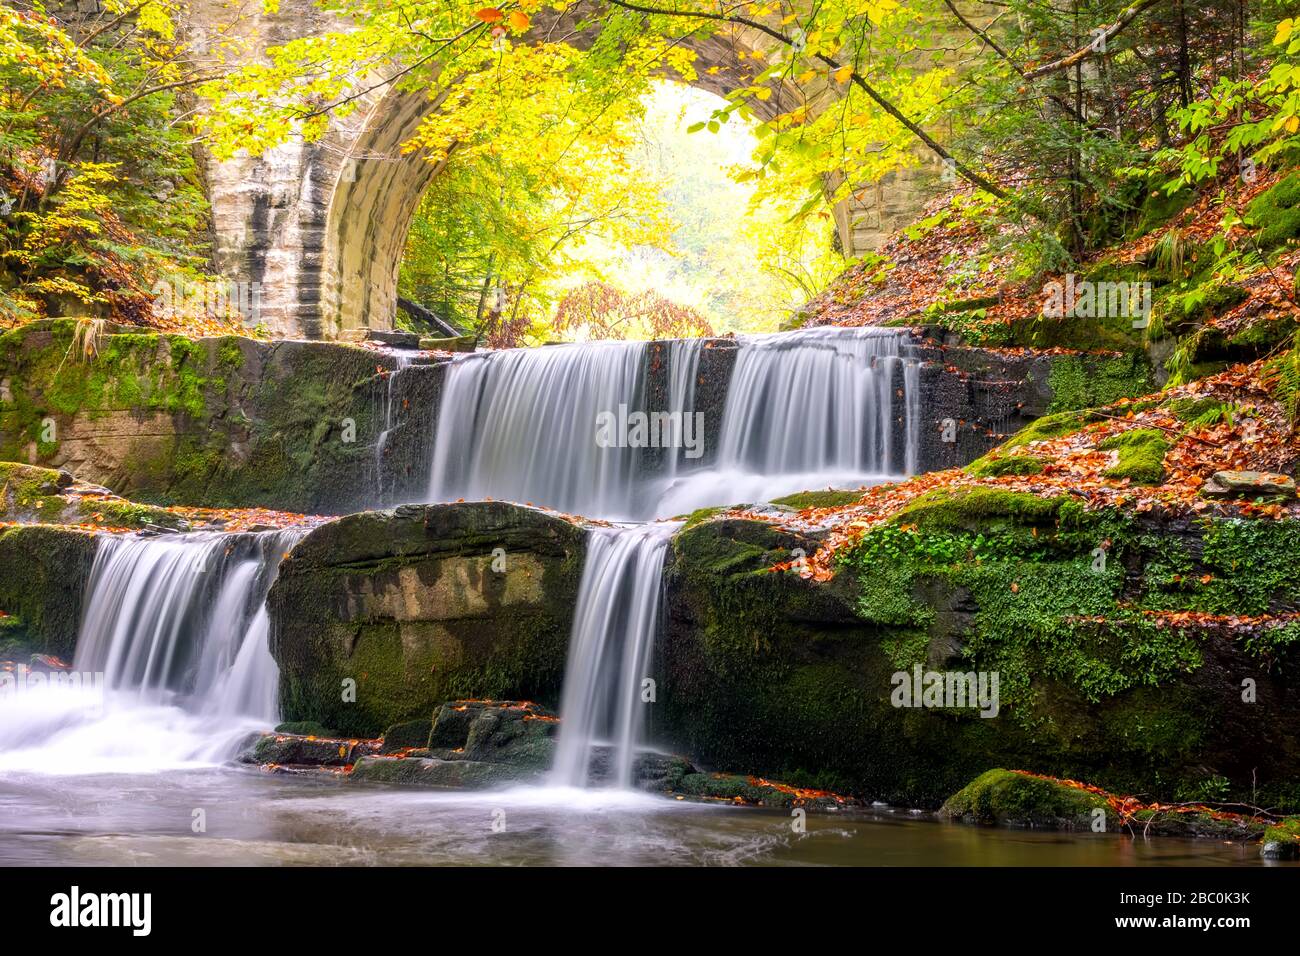 Sunny day in the summer forest. Old stone bridge. Small river and several natural waterfalls Stock Photo